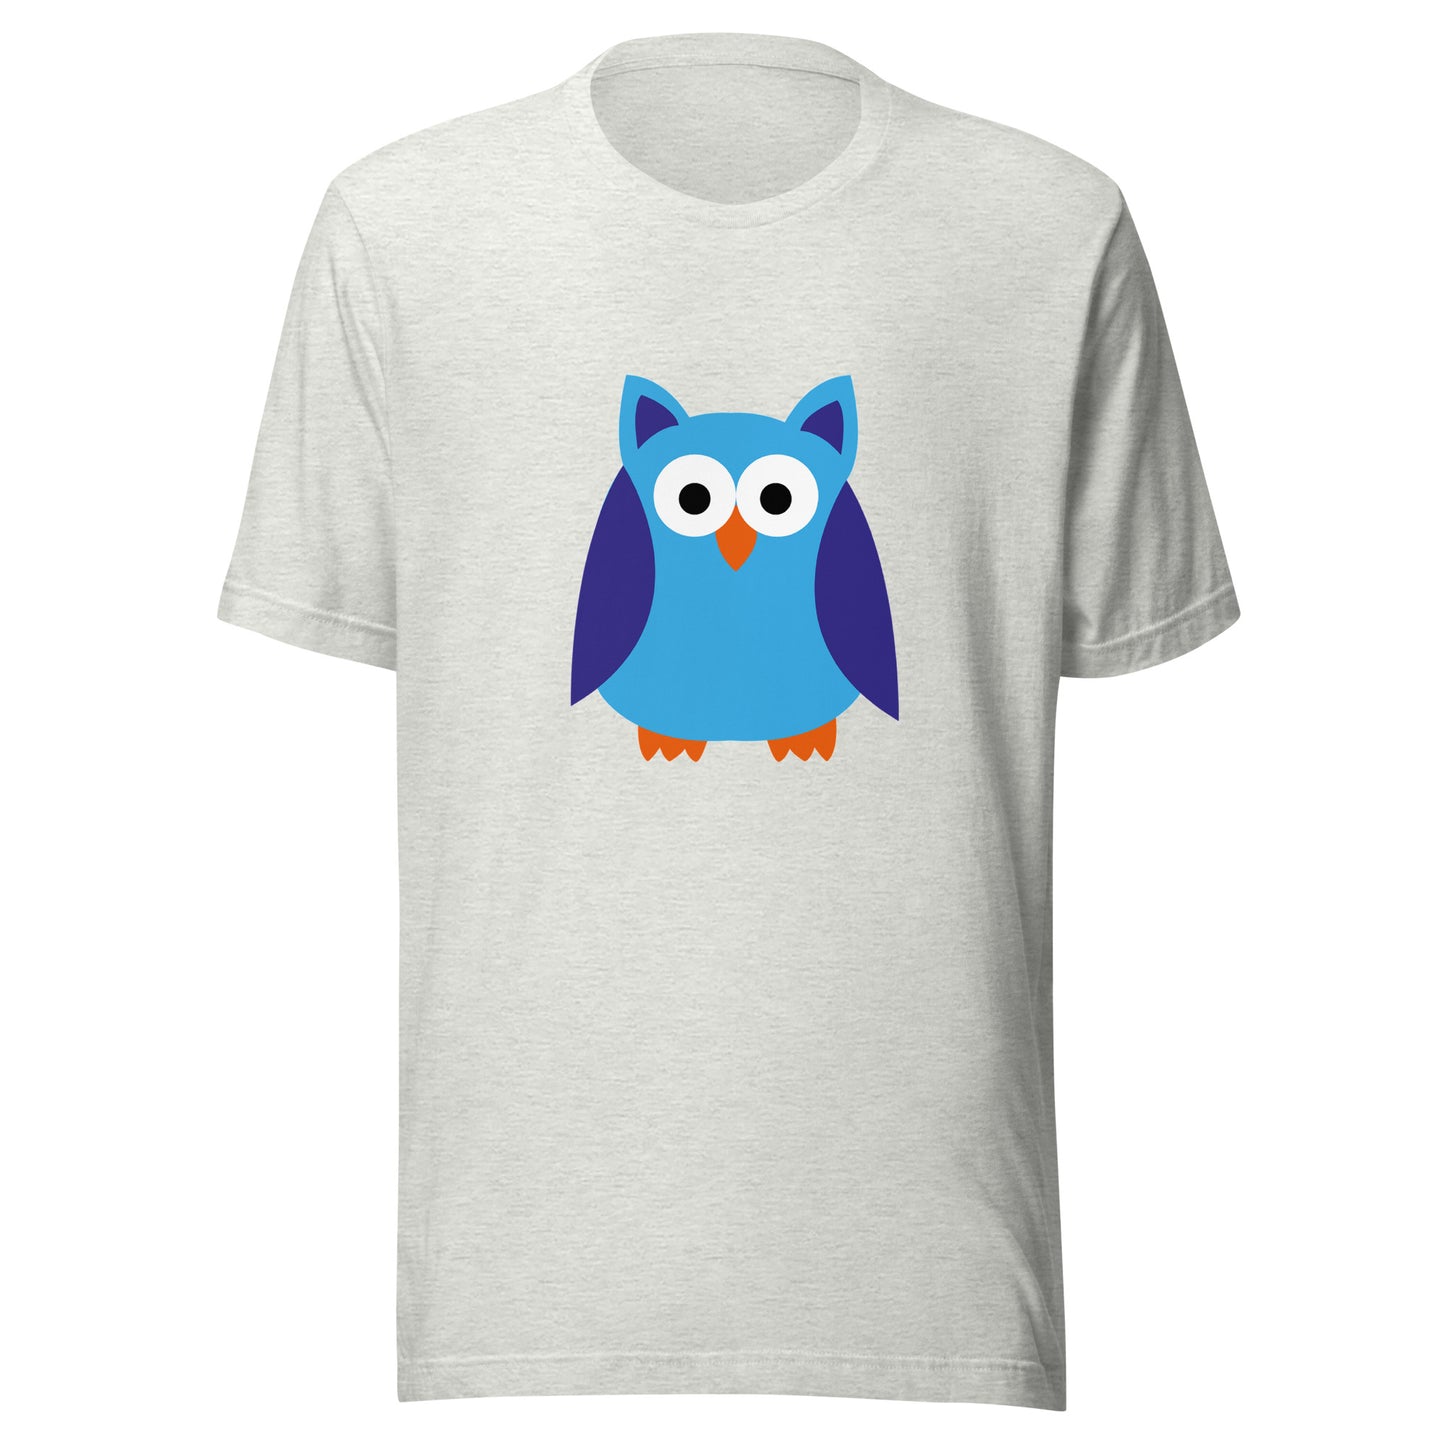 Women and Men's ( Unisex)  T-Shirt Printed with an Owl